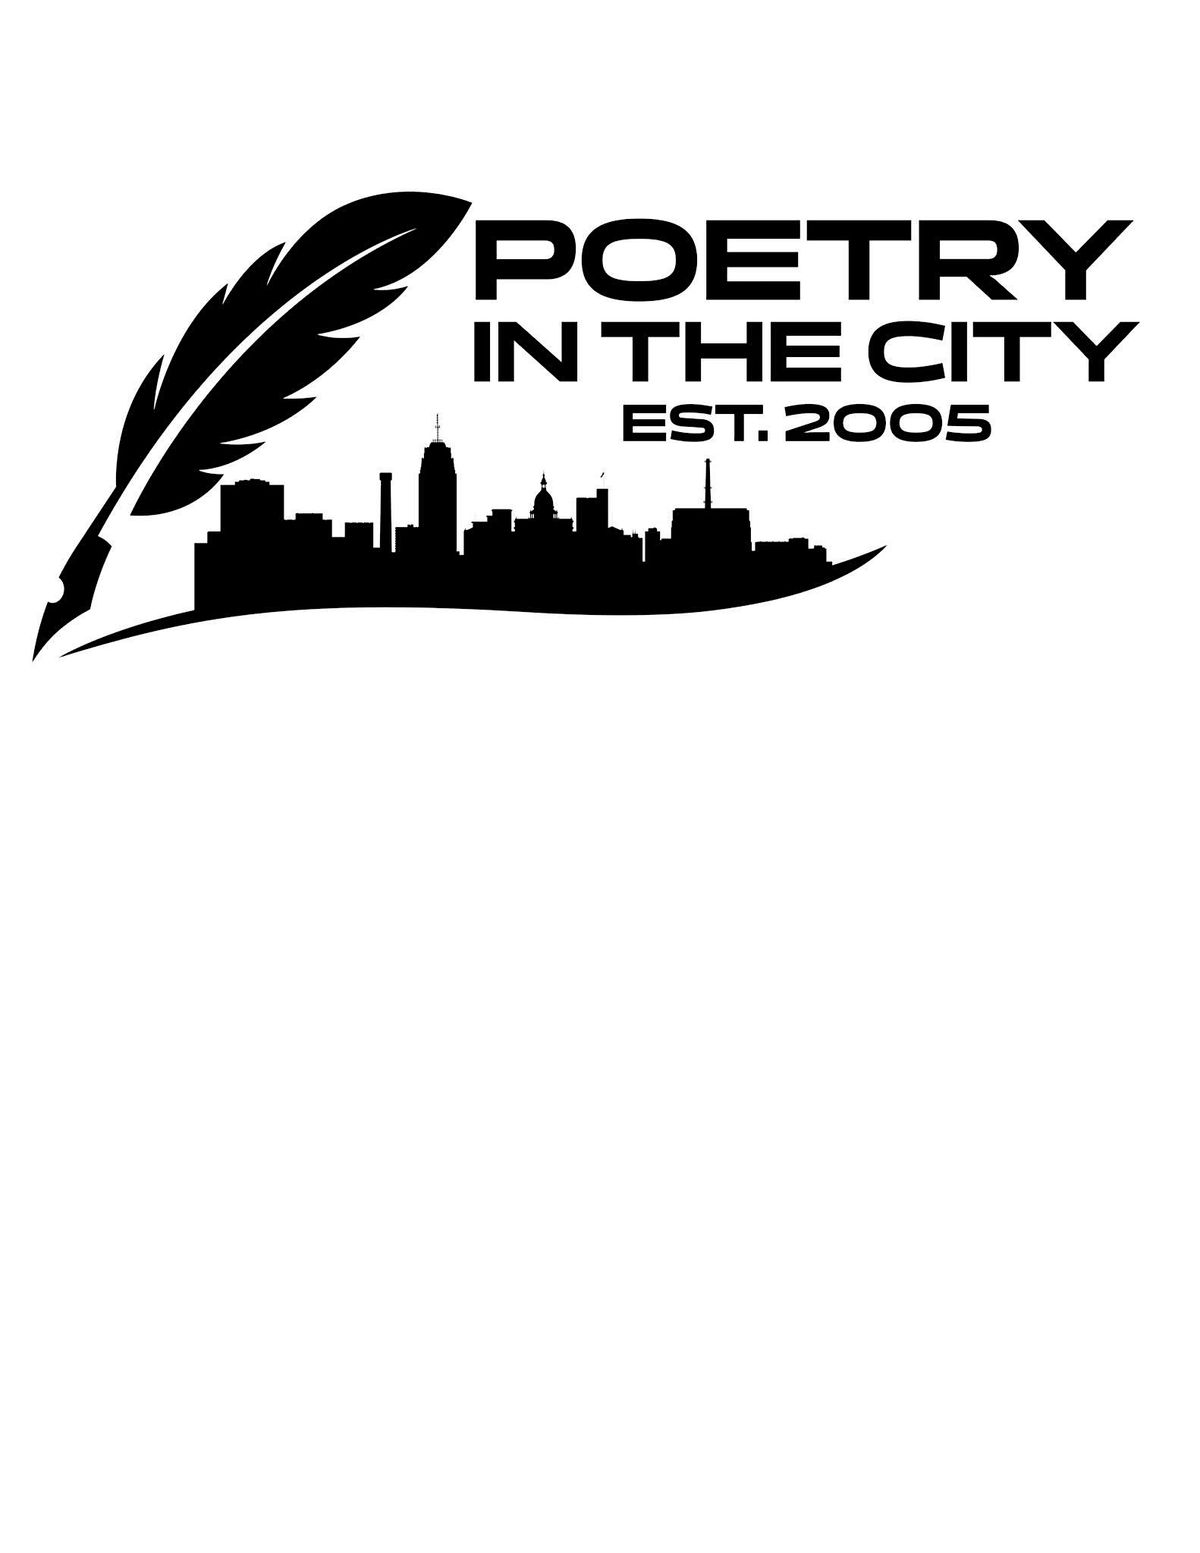 20th Annual Poetry in the City